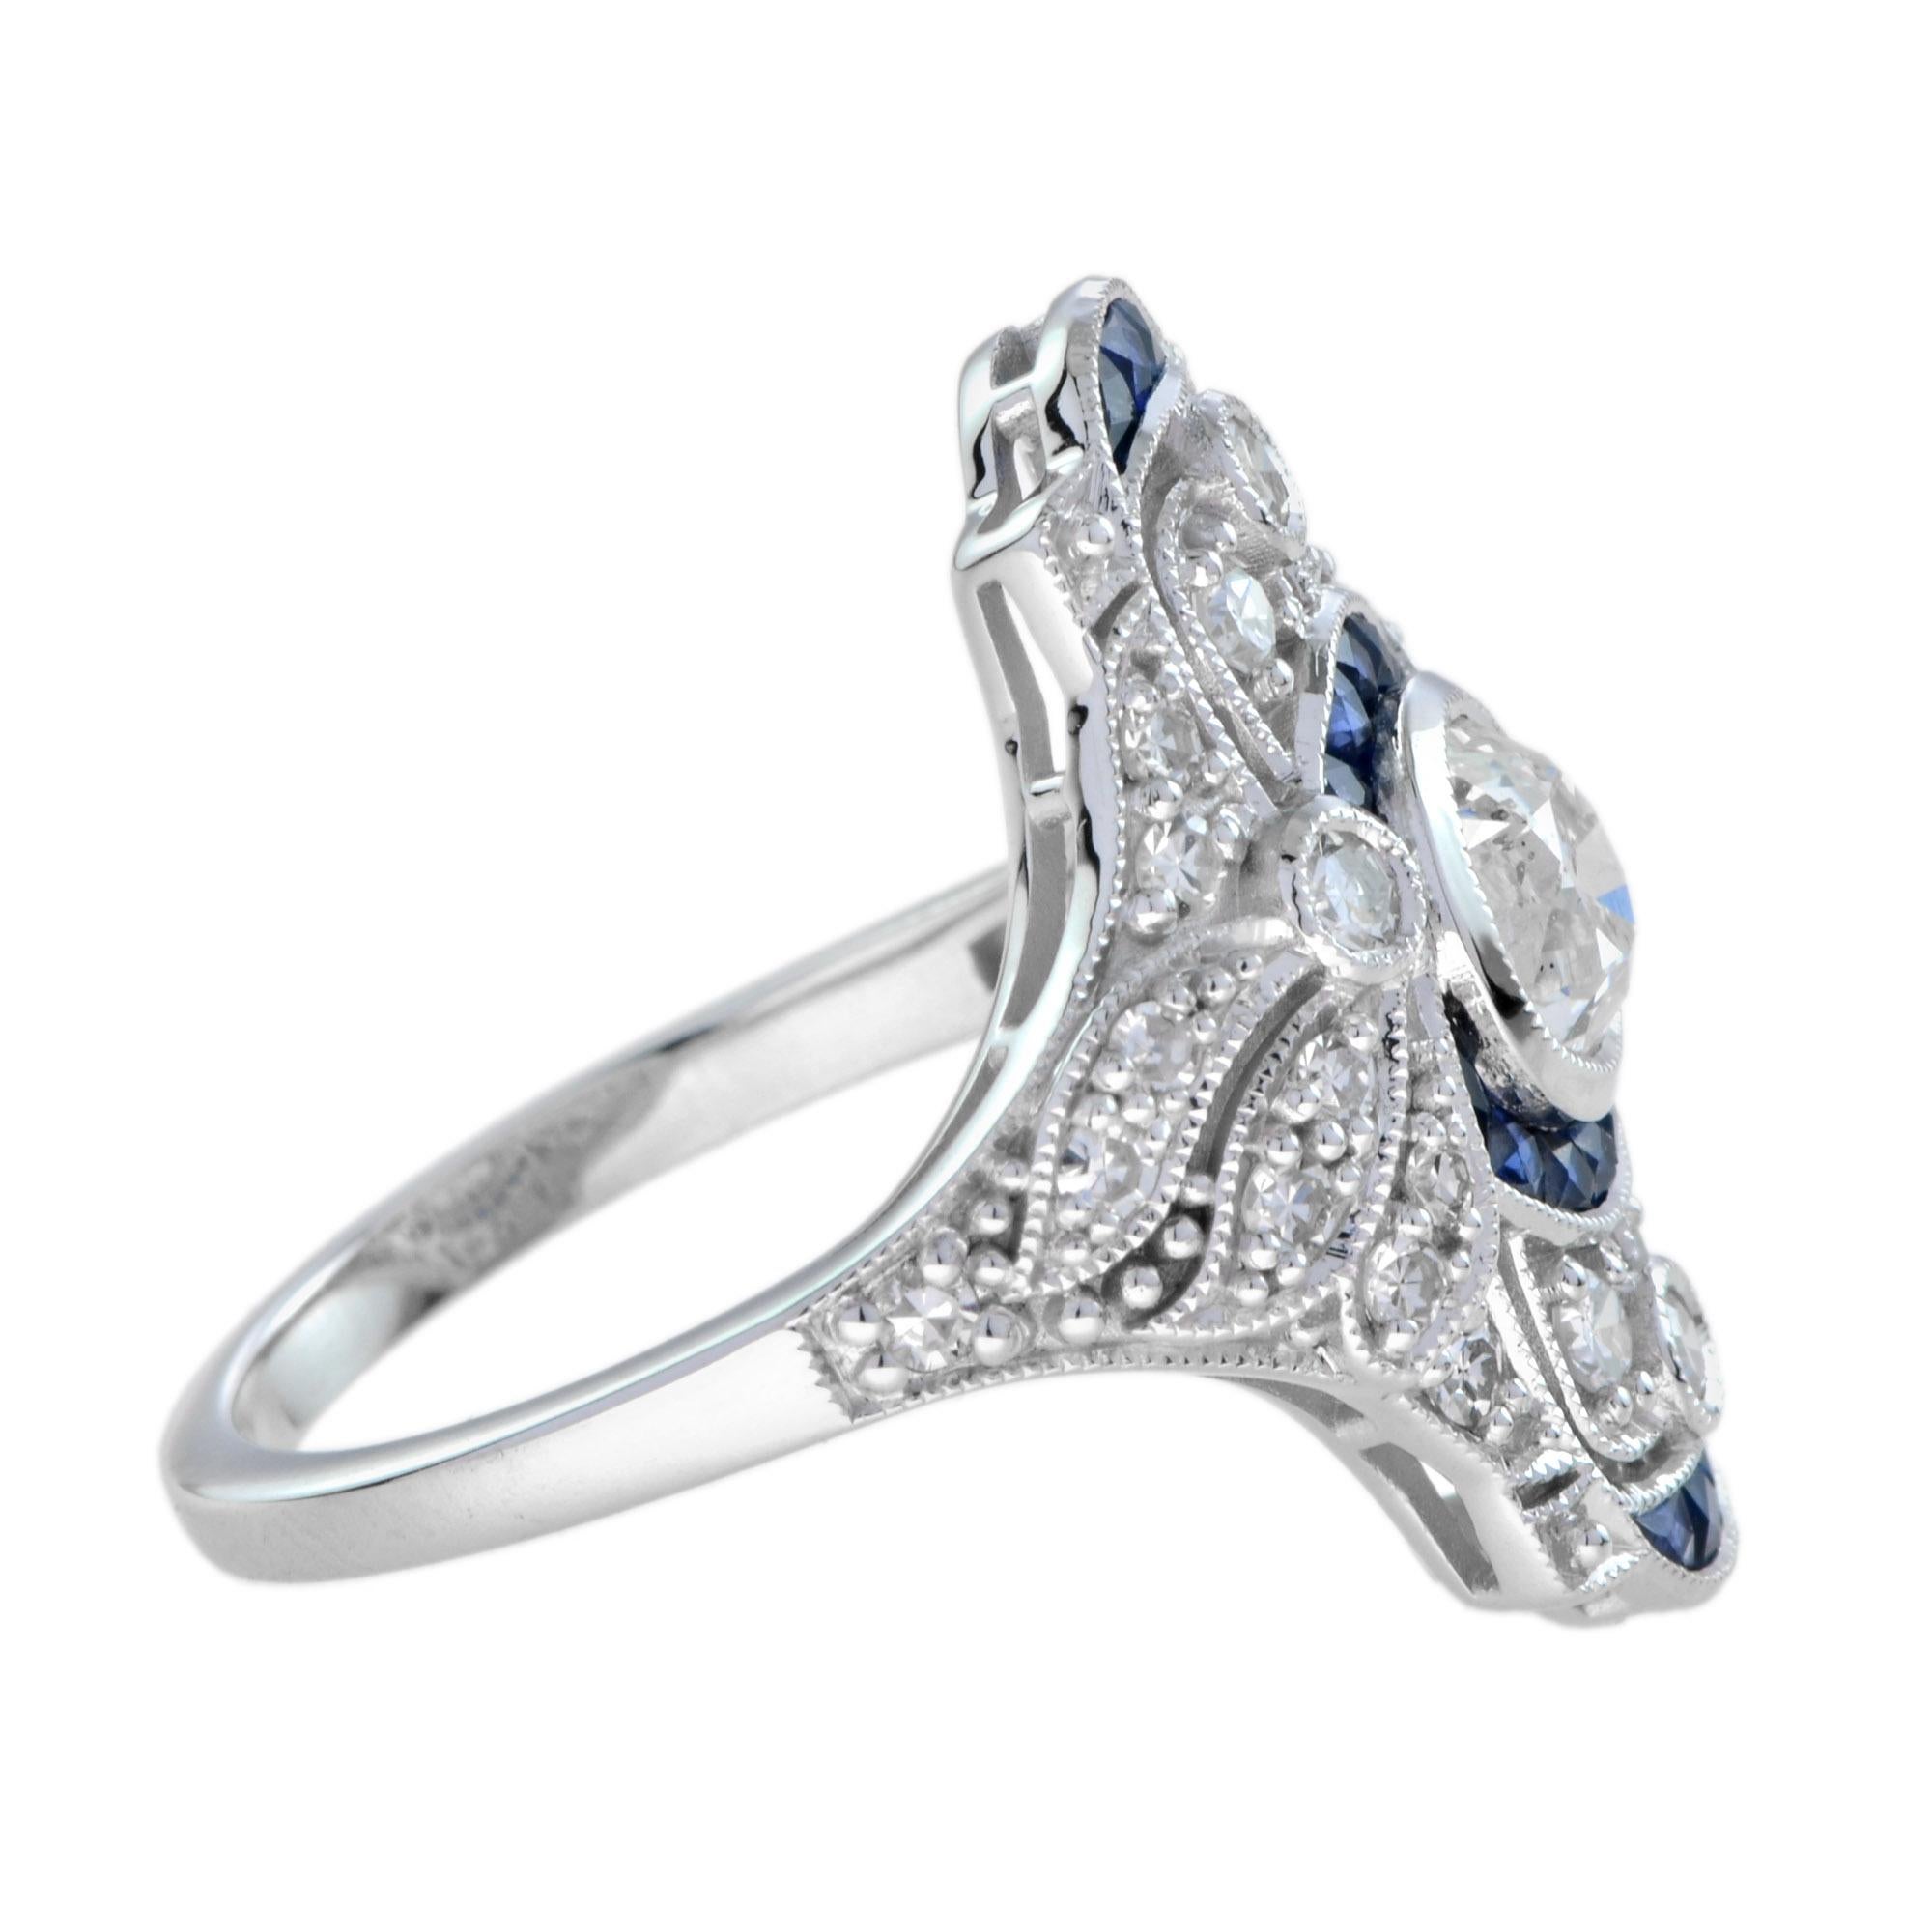 Women's or Men's GIA Old Cut Diamond and Sapphire Art Deco Style Dinner Ring in 18k White Gold